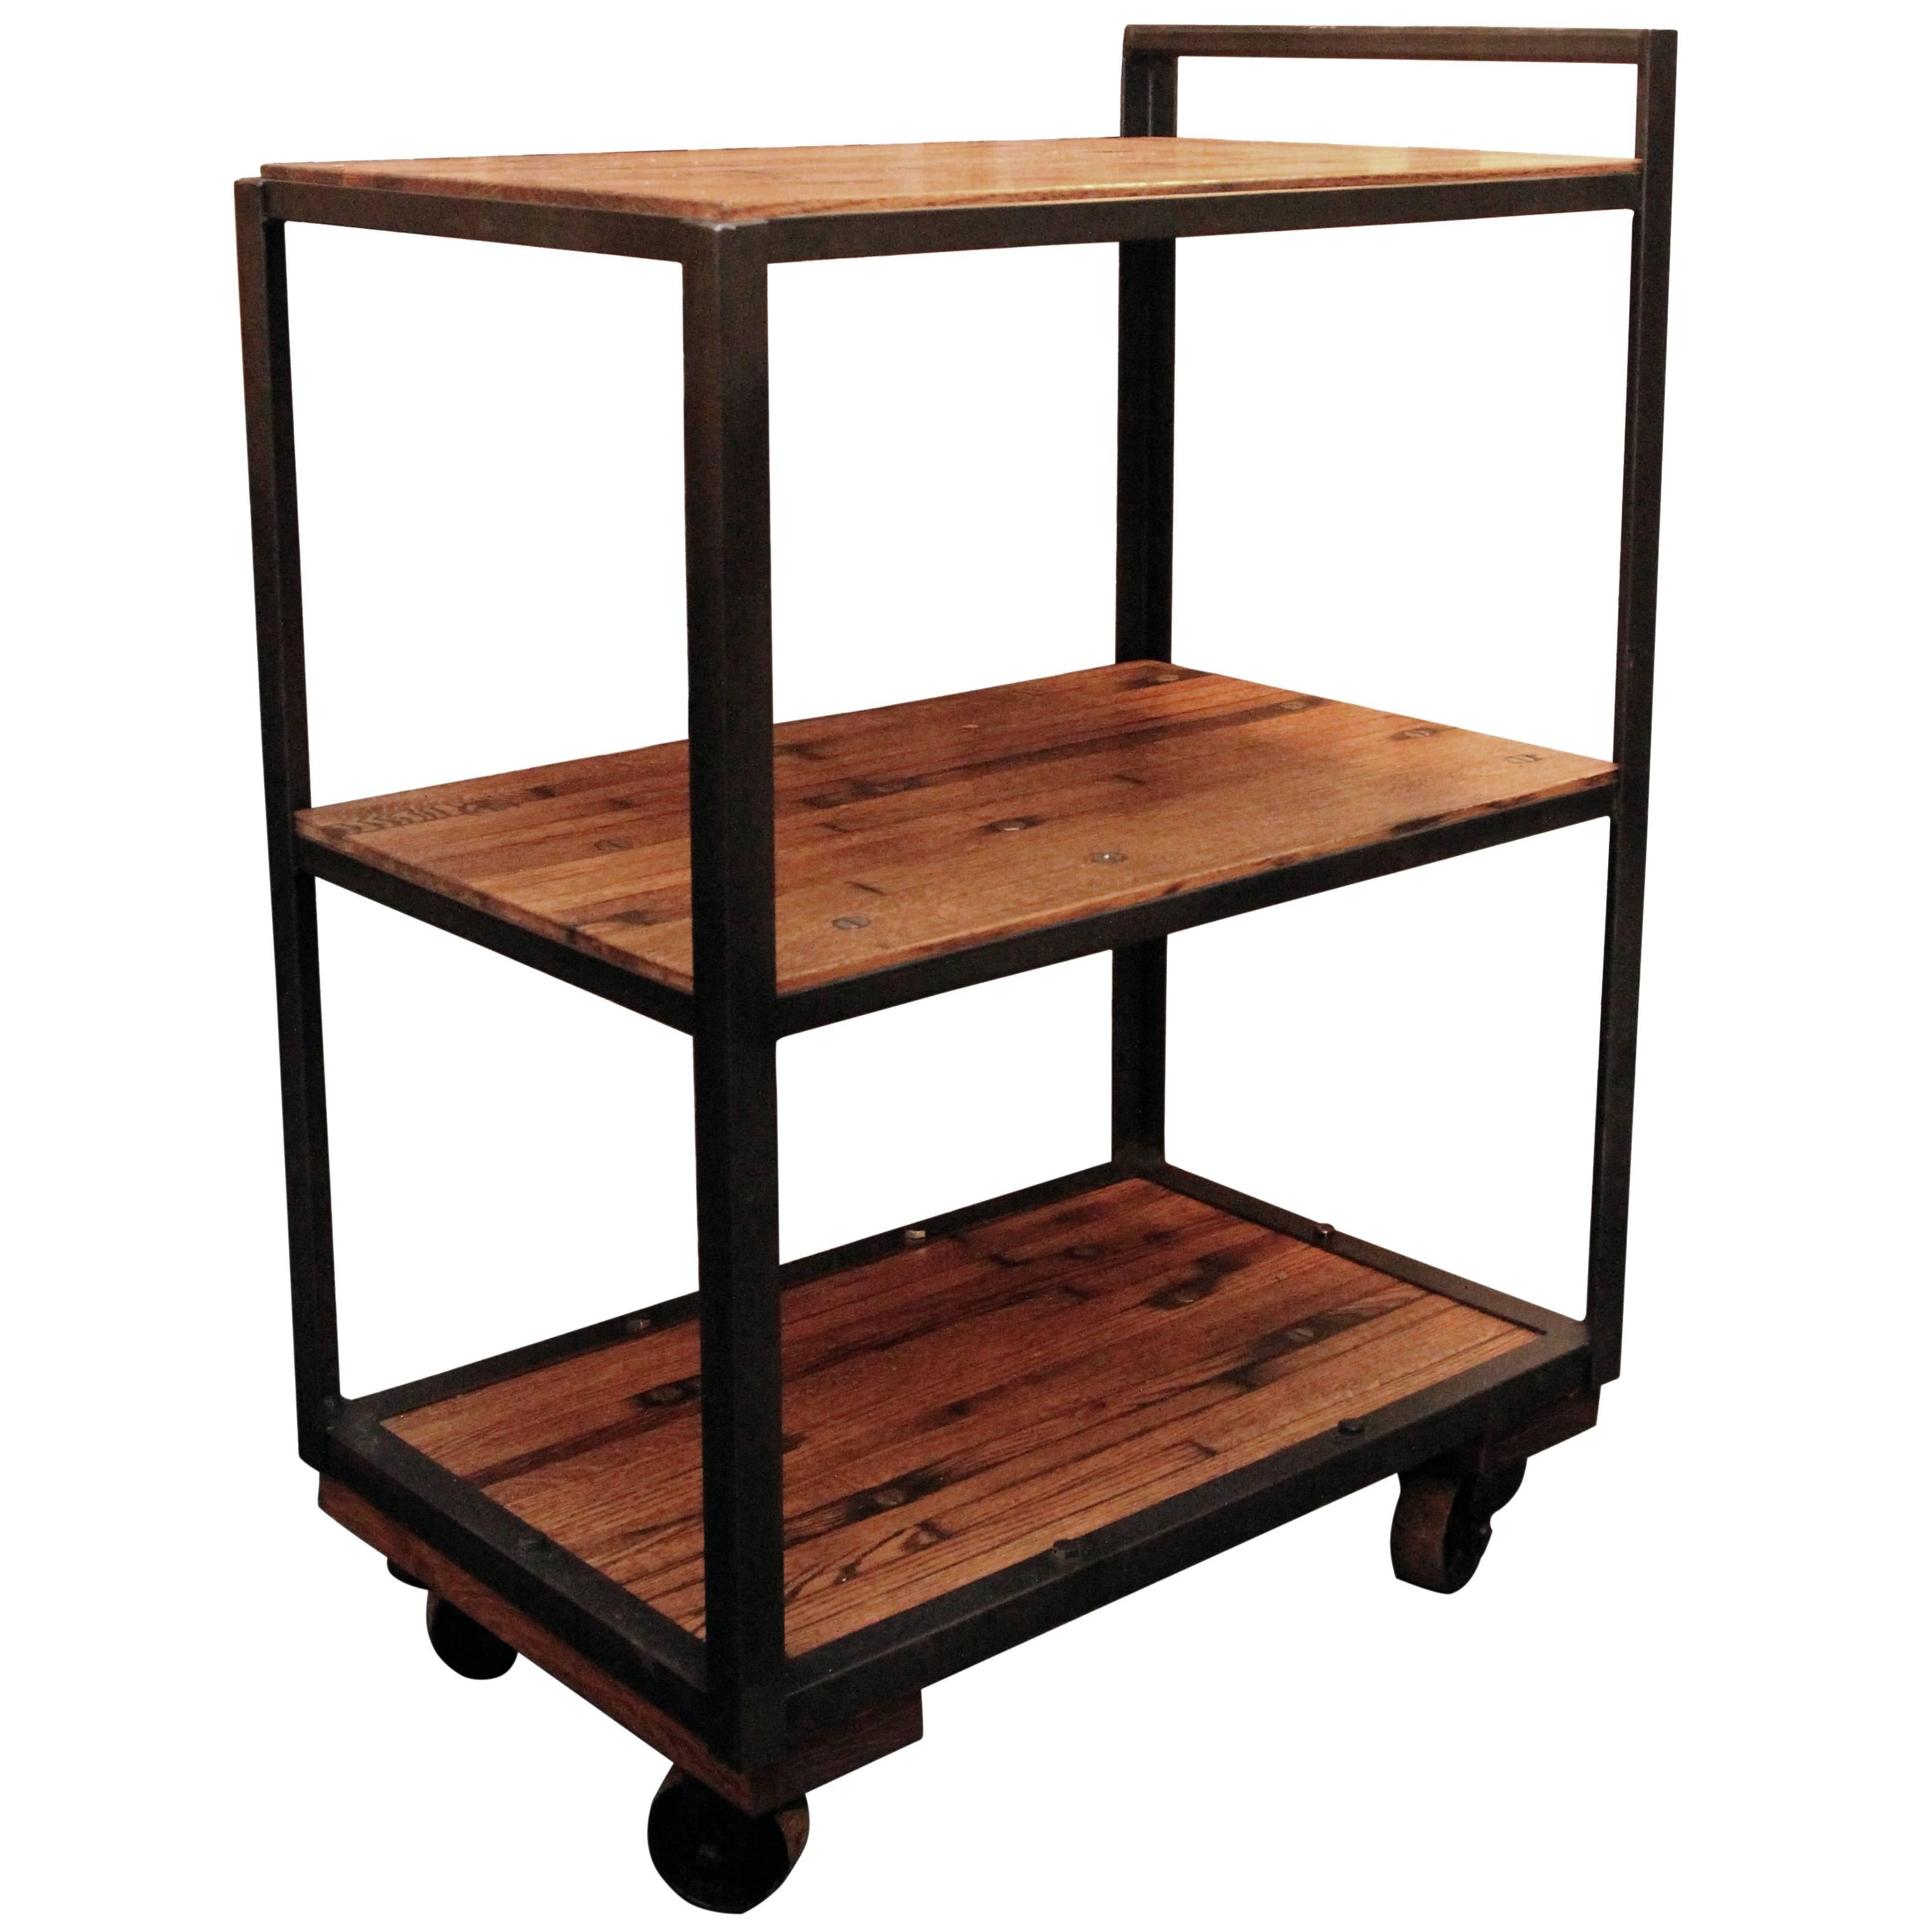 Industrial Bar or Tea Cart with Salvaged Wood Flooring Shelves and Casters